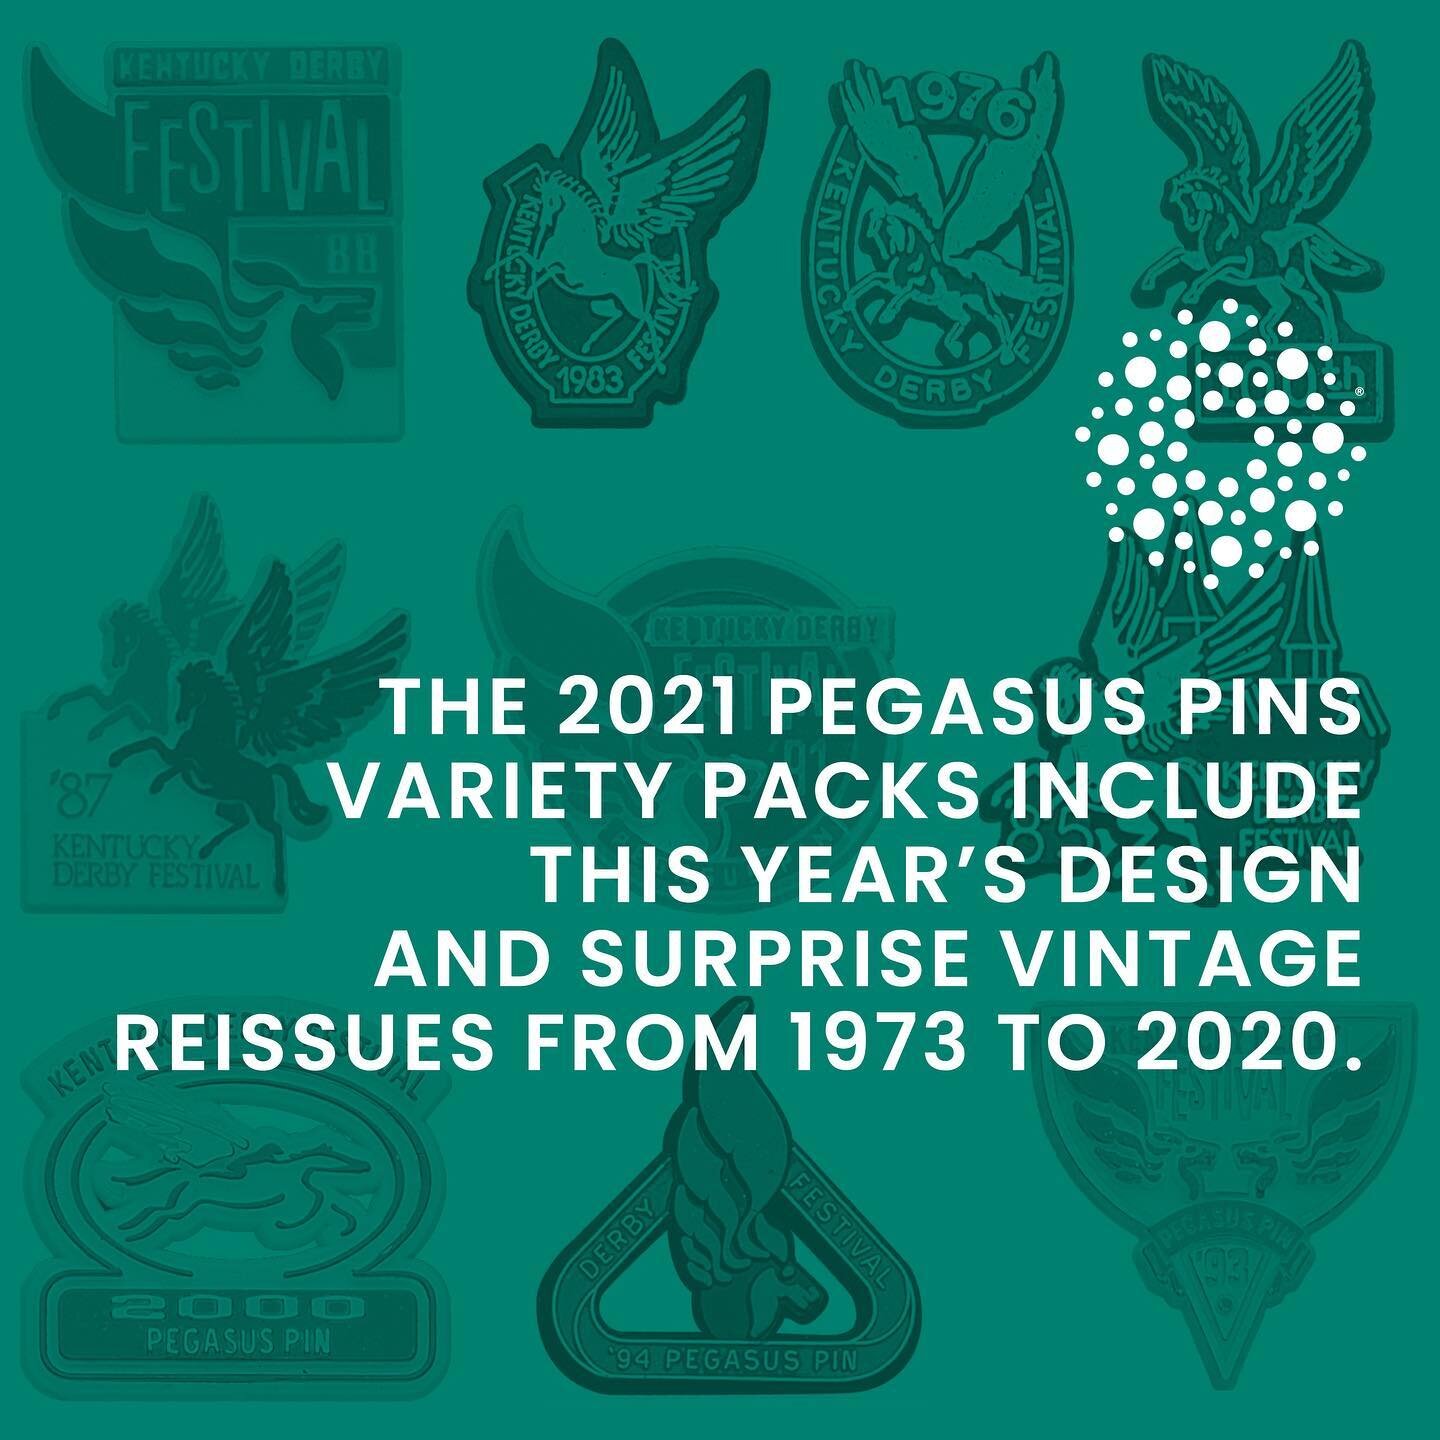 The Pegasus Pins are an affordable all-access pass to many of The Kentucky Derby Festival events, but they also provide a way for the not-for-profit festival to continue providing these events to the community. 

Each year, the individual sales of $6